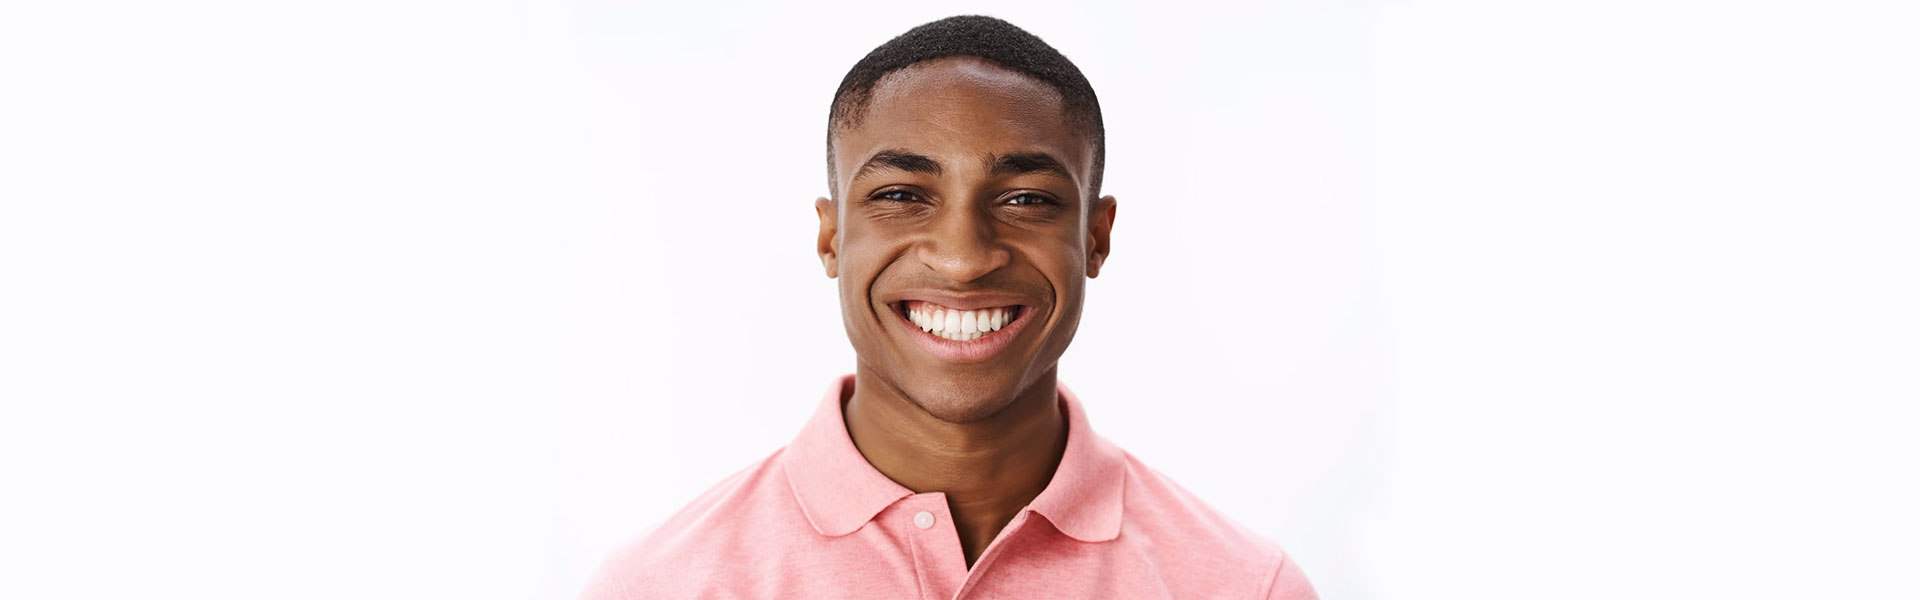 Boy smiling confidently after getting dental implants in Oshawa, ON.